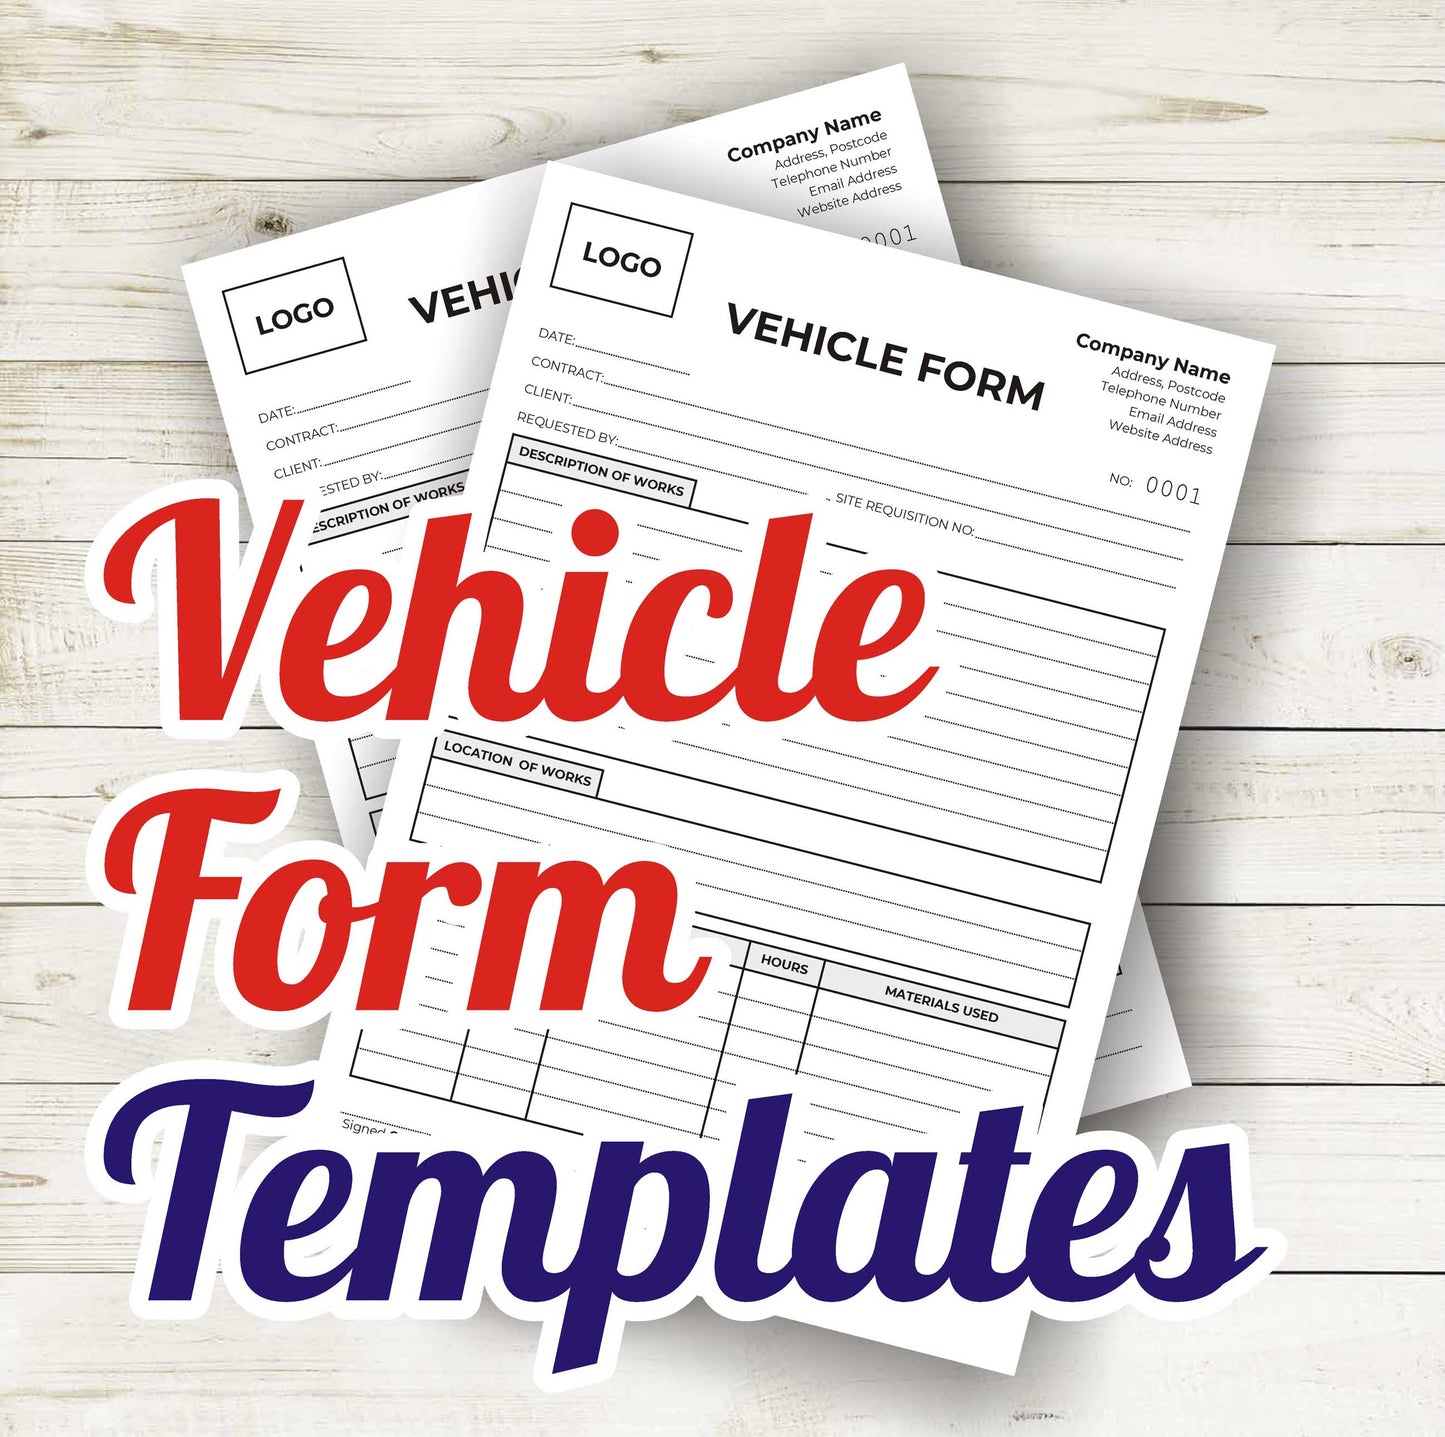 Vehicle Form Templates